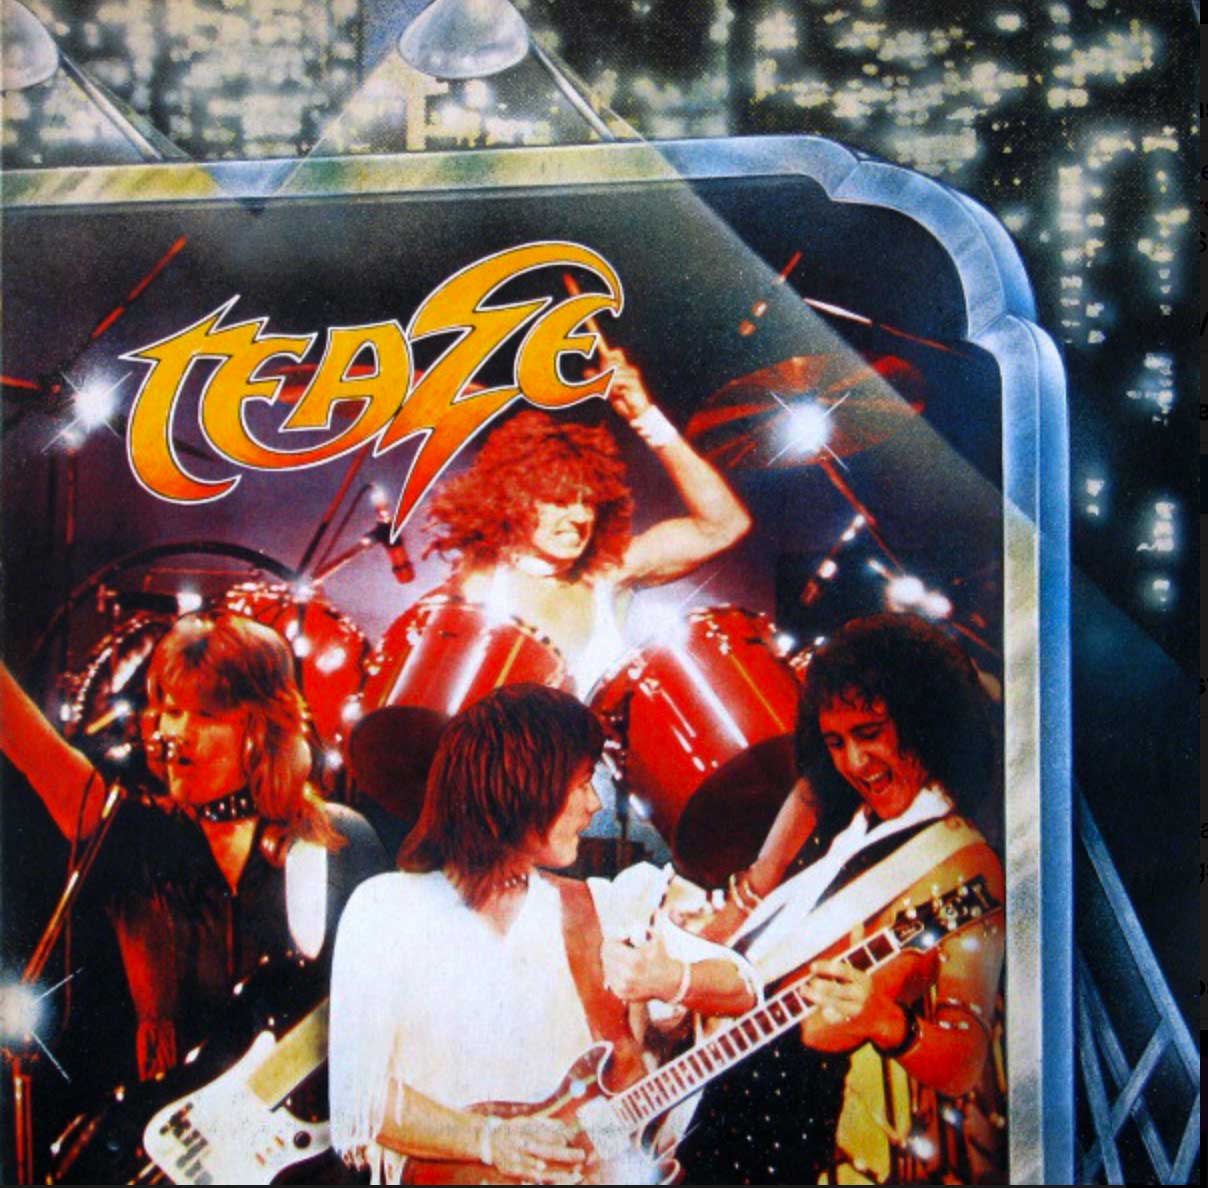 Teaze - On The Loose - 1st Pressing - RARE